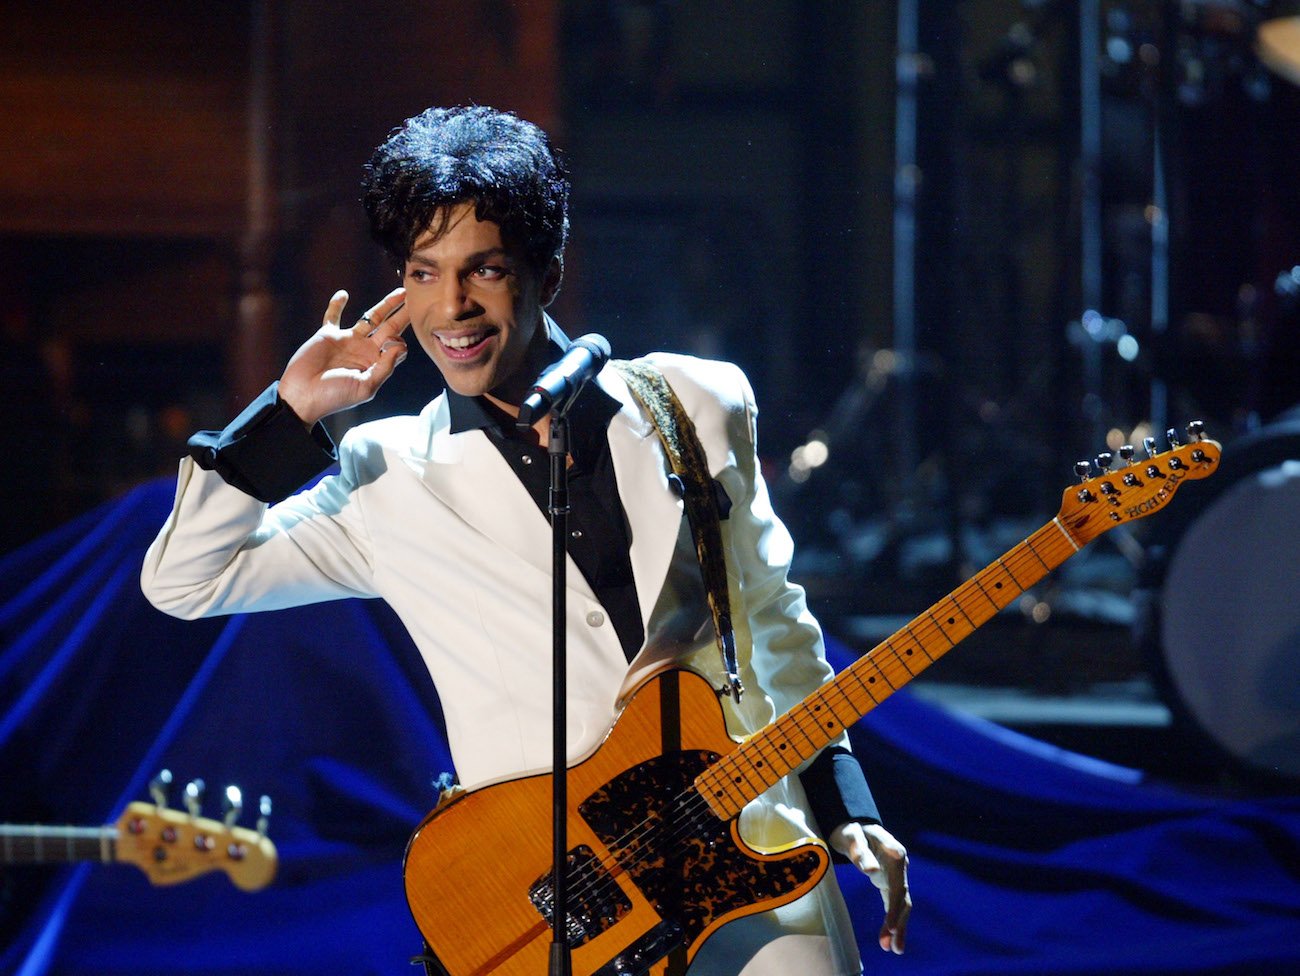 Prince performing during his induction into the Rock & Roll Hall of Fame in 2004.